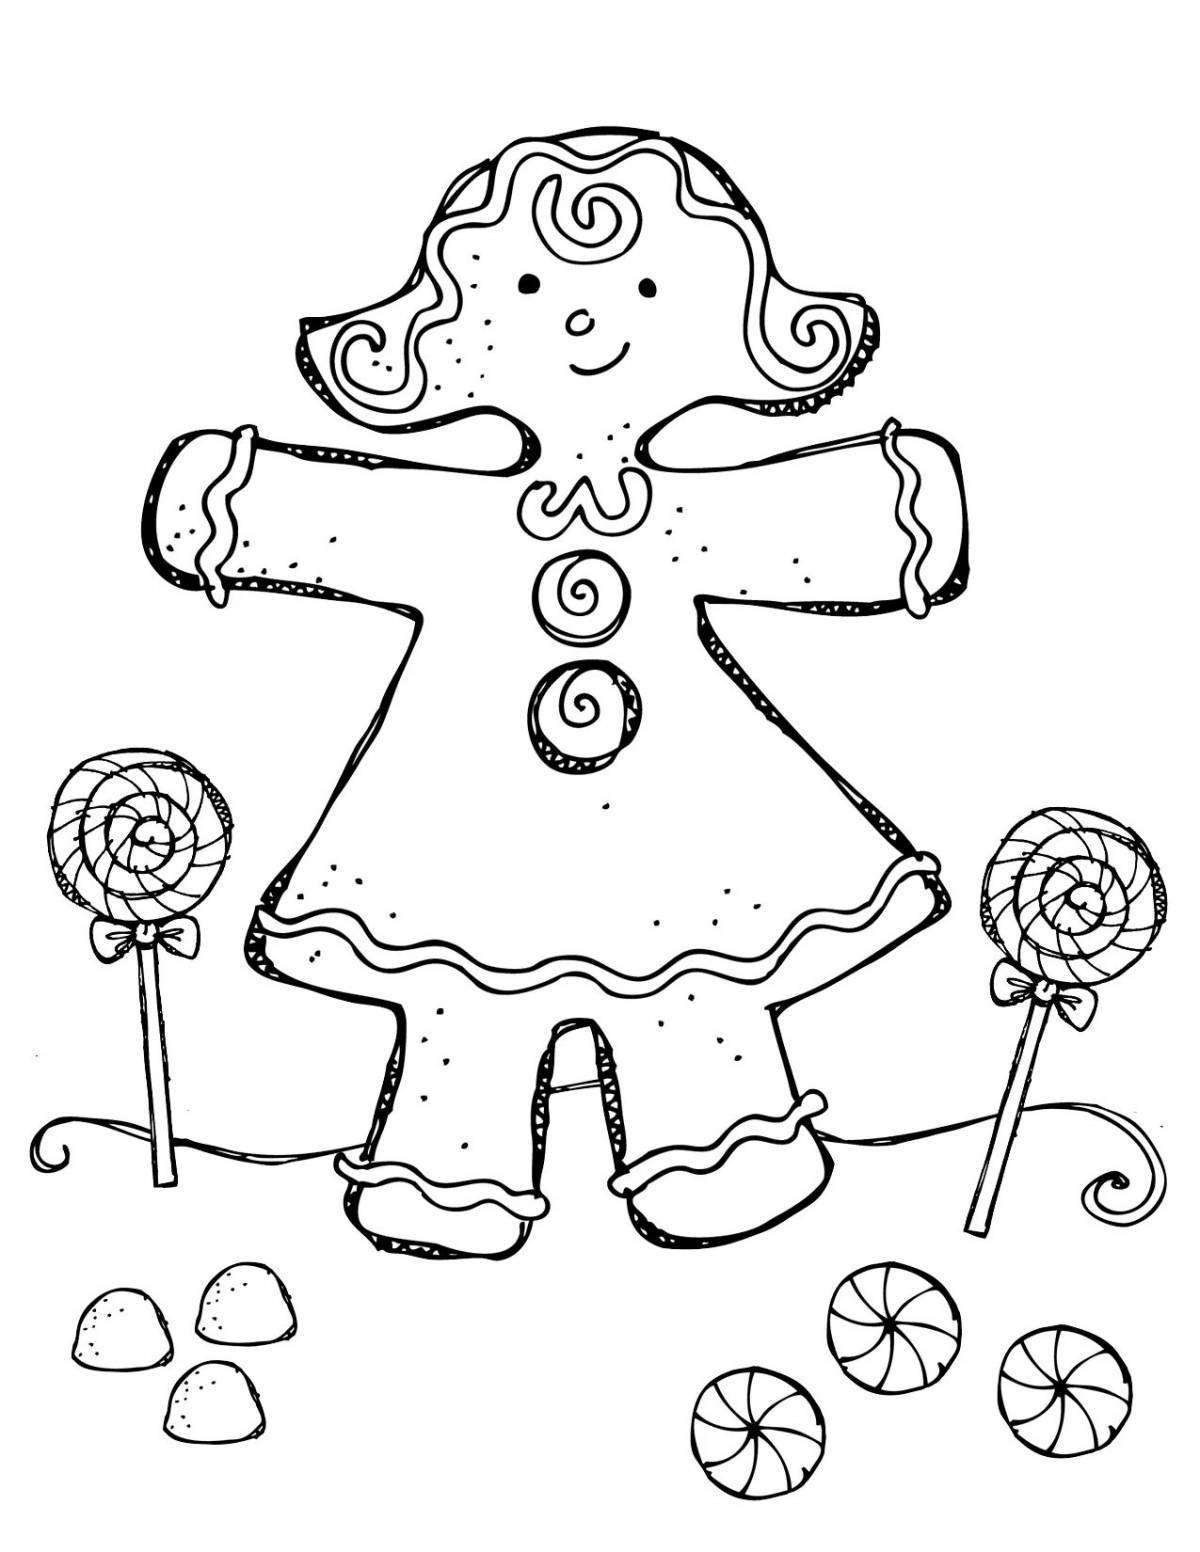 Sweet gingerbread man coloring page